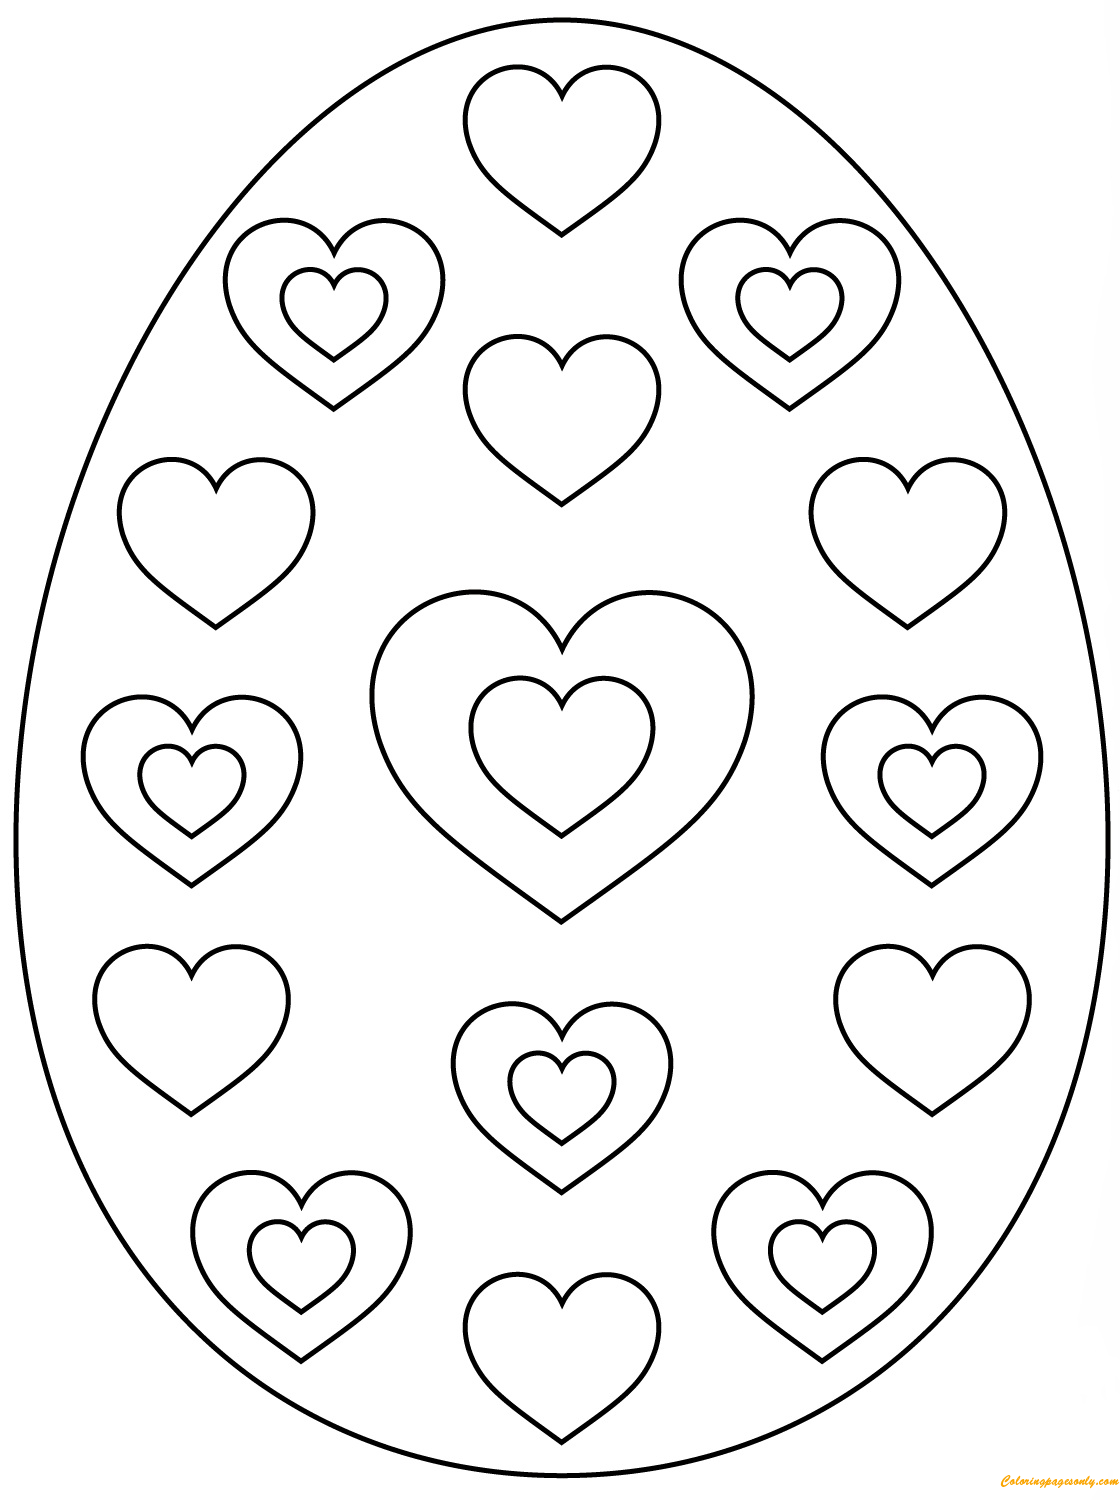 Download Easter Egg Hearts Pattern Coloring Pages - Arts & Culture Coloring Pages - Free Printable ...